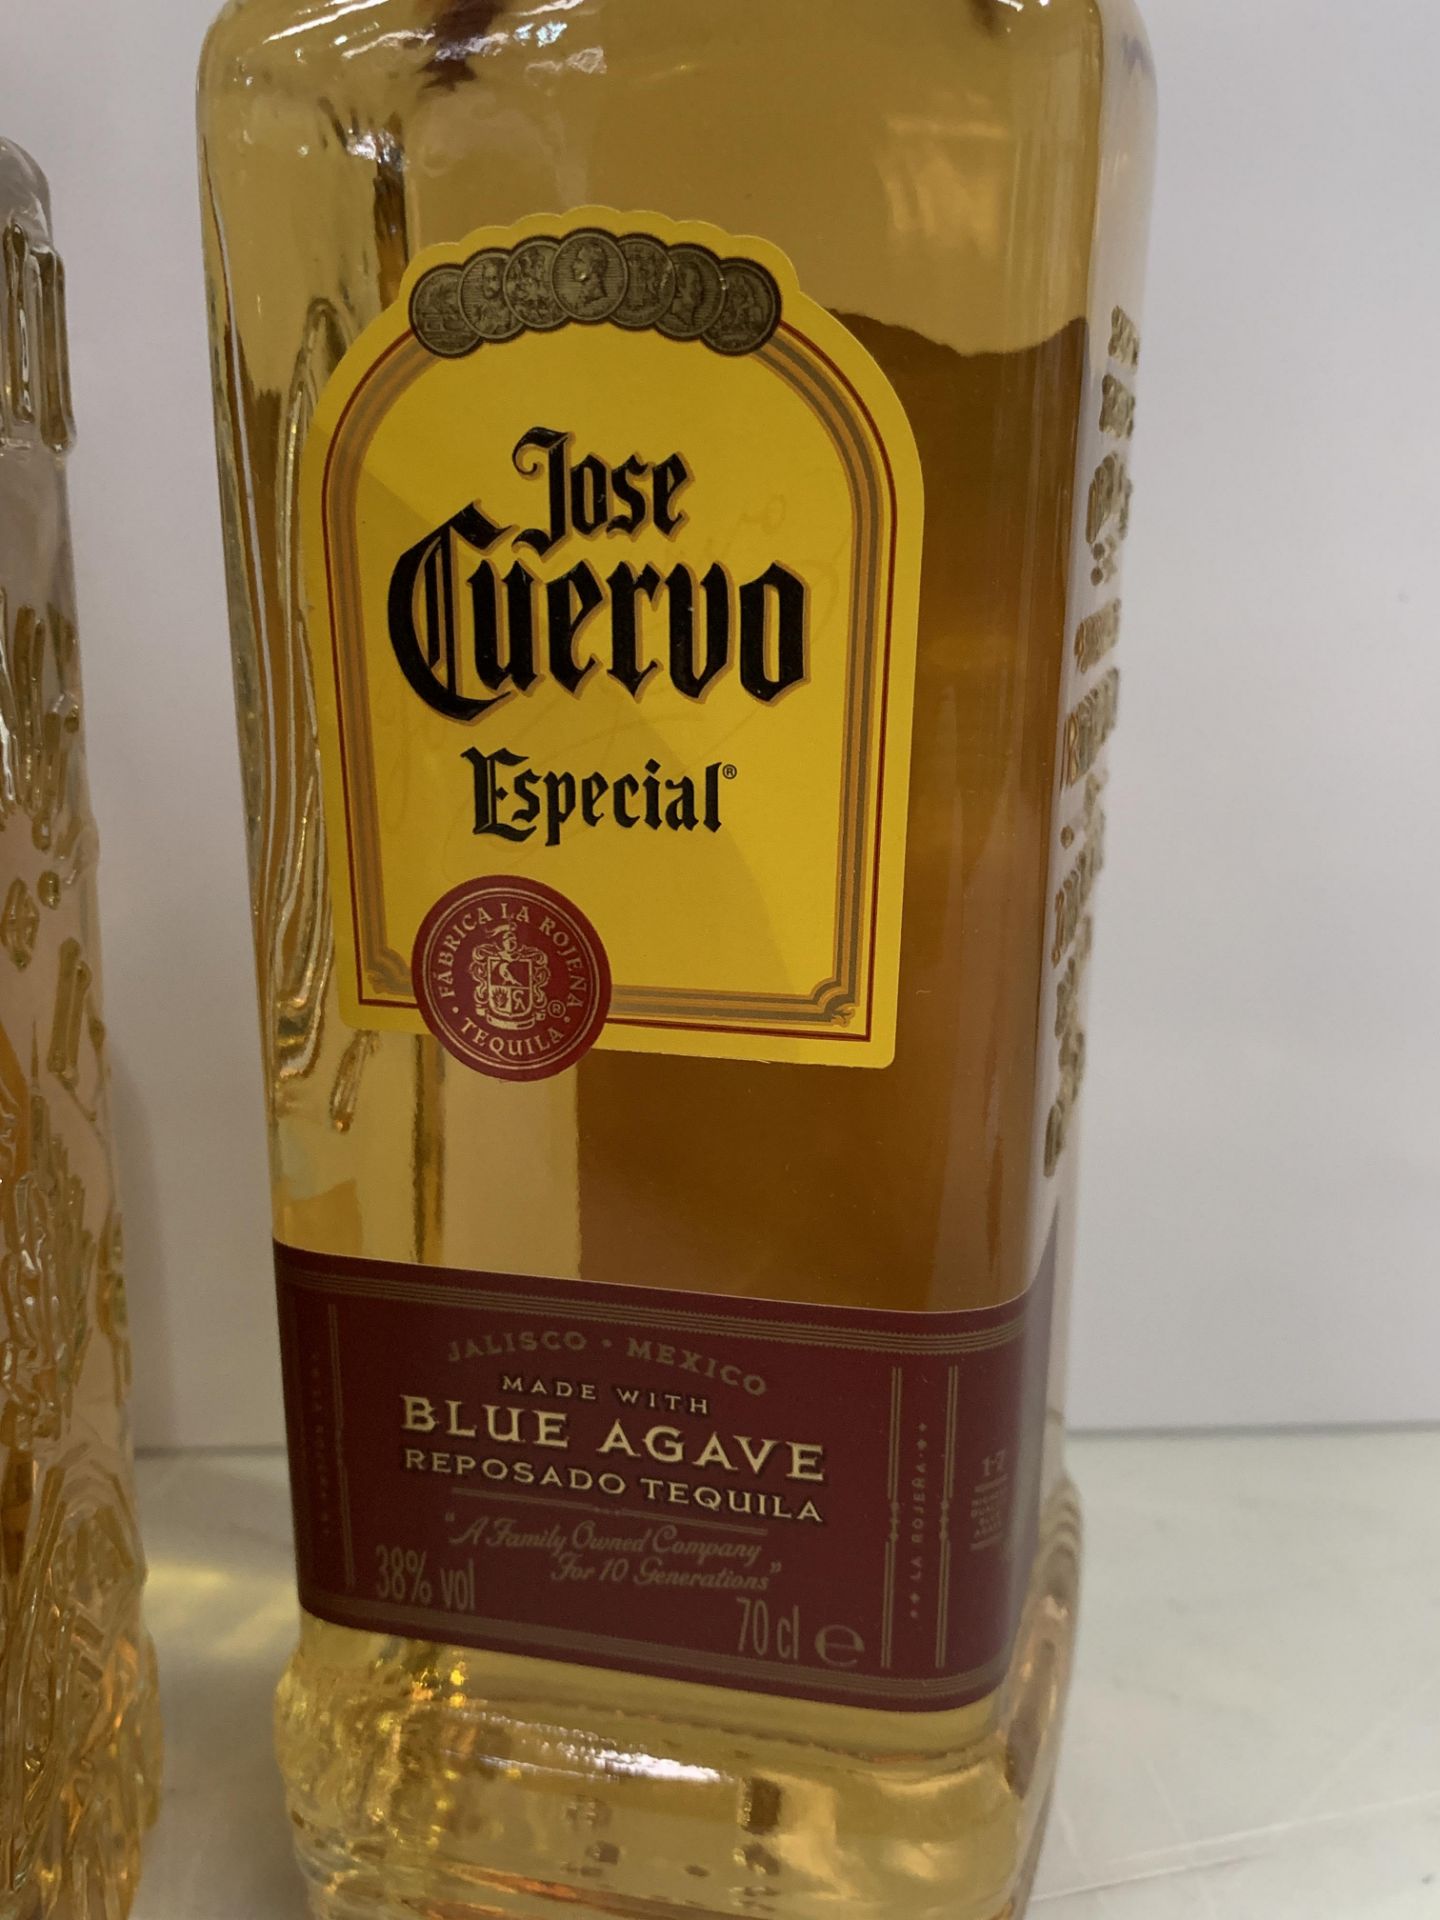 5 x Bottles of Tequila Including: 3 x Olmeca Reposado 70cl 35% and 2 x Jose Cuervo Especial 70cl 38% - Image 4 of 5